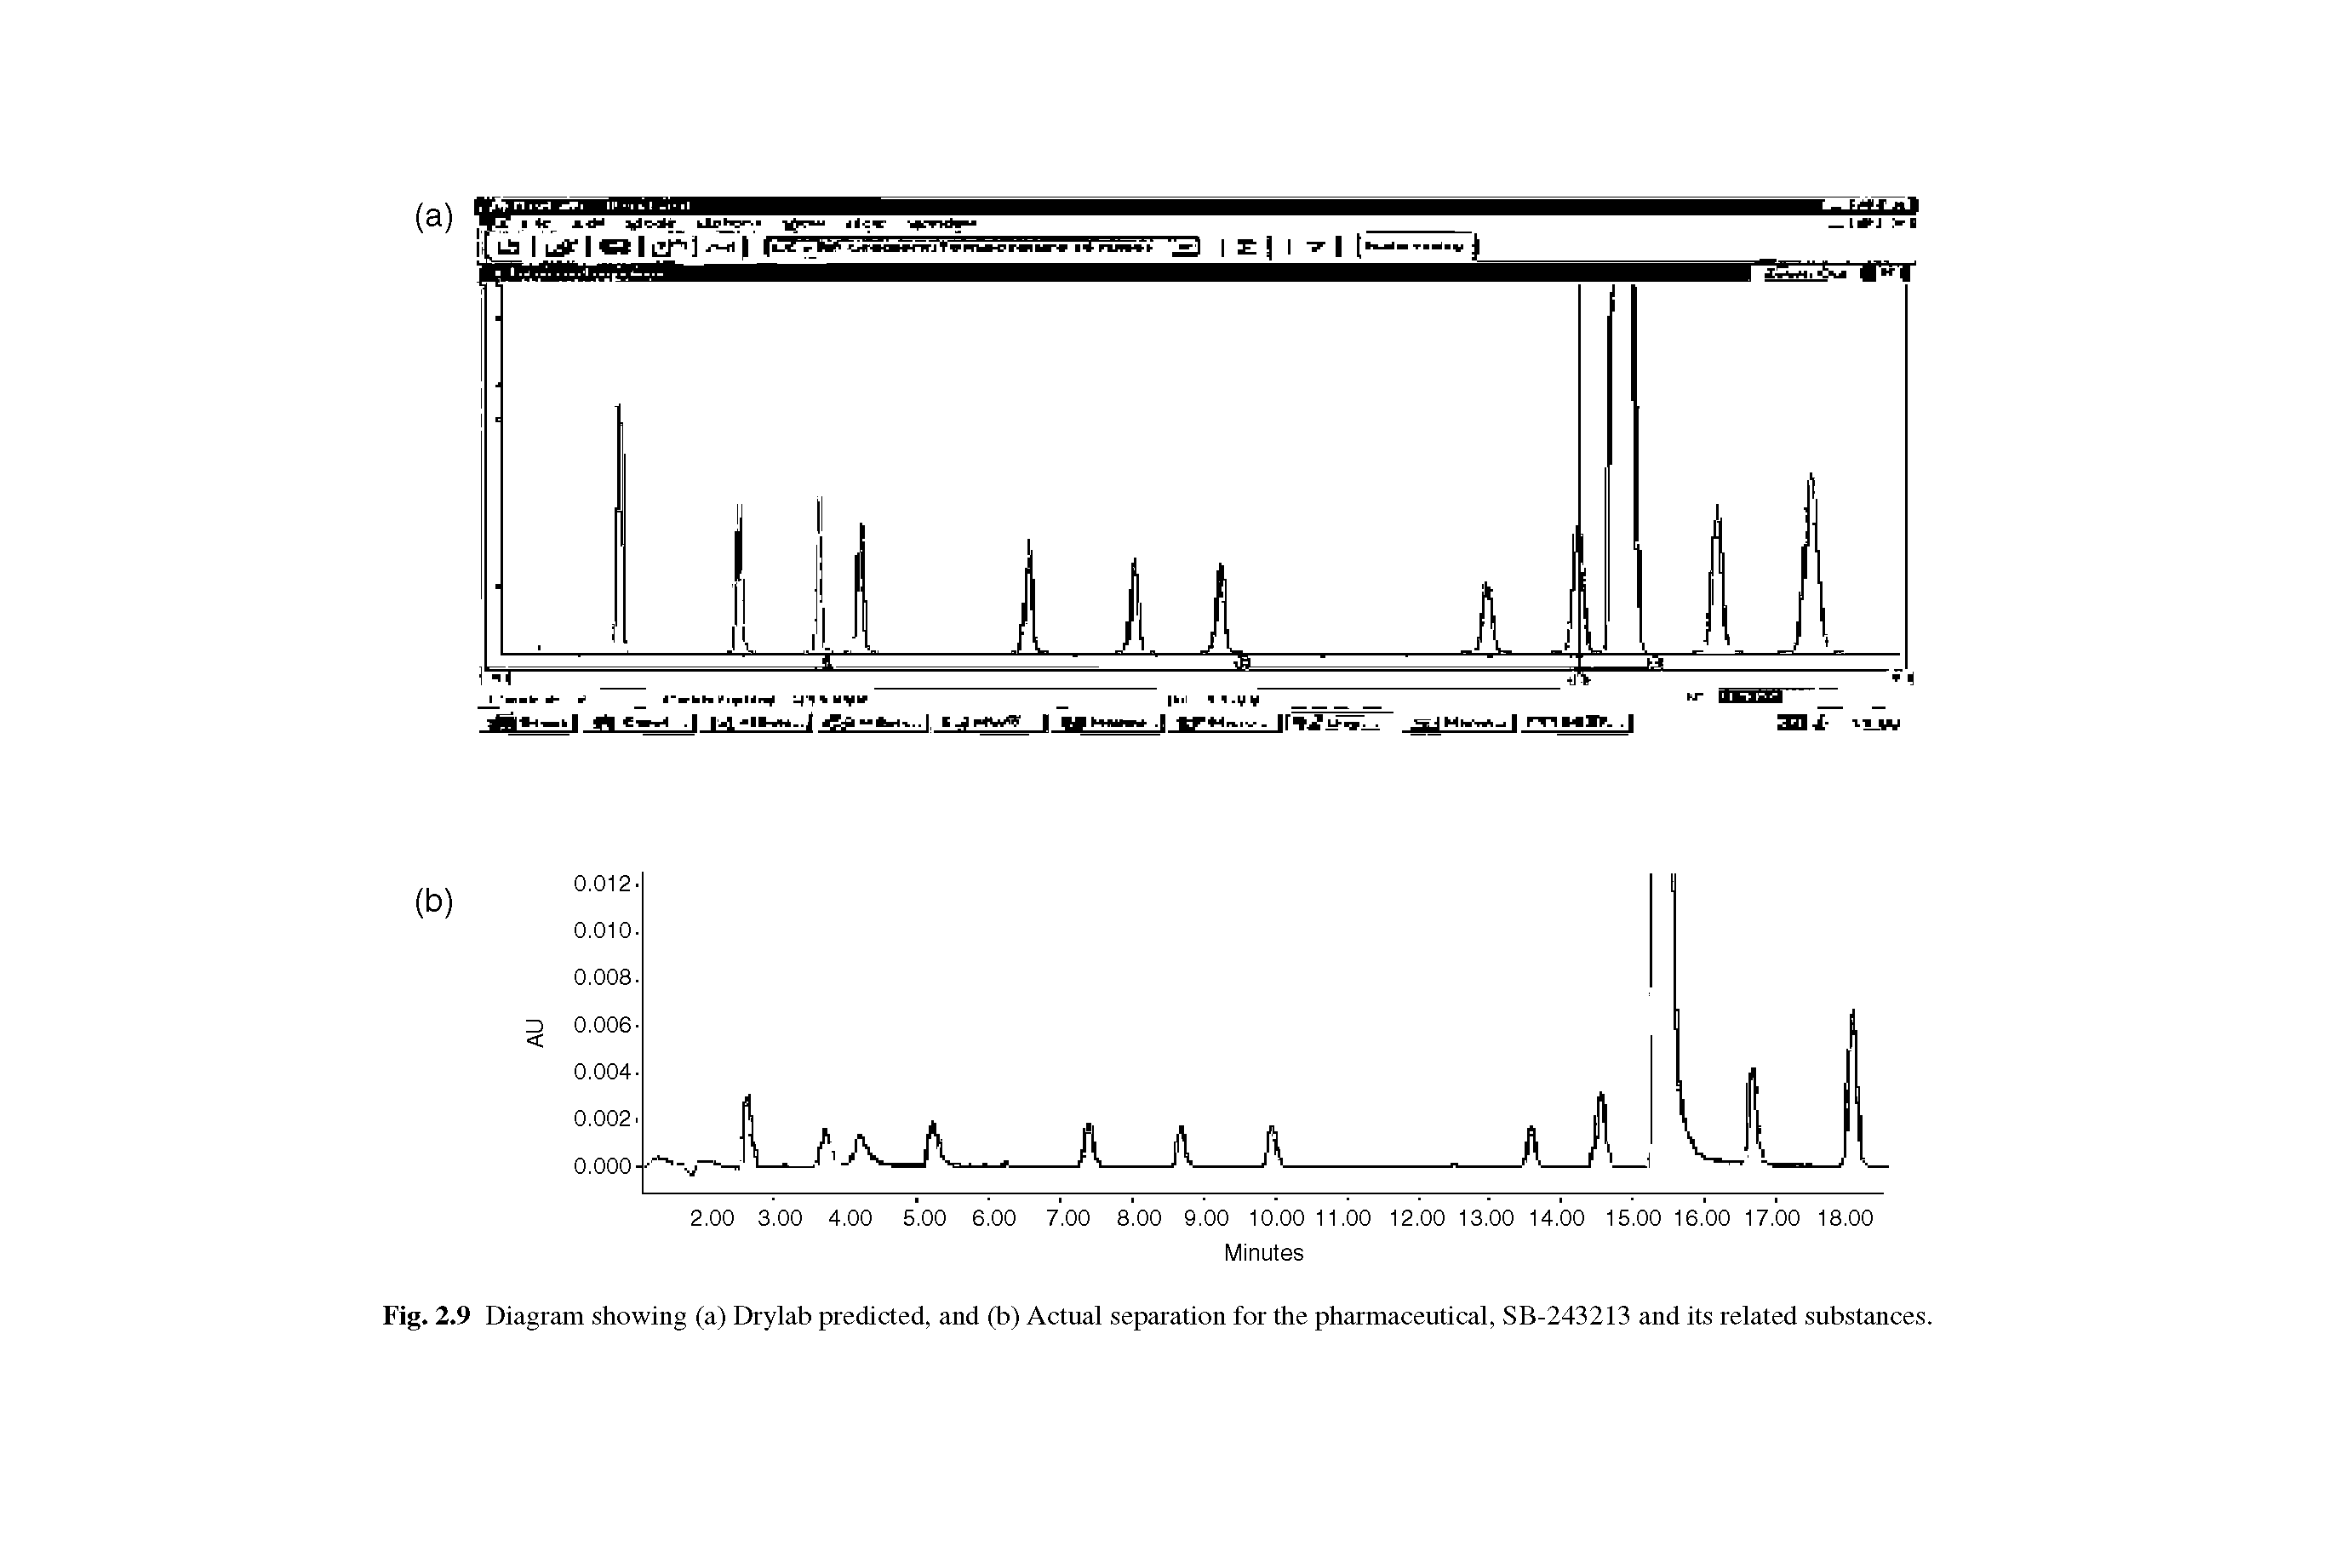 Fig. 2.9 Diagram showing (a) Drylab predicted, and (b) Actual separation for the pharmaceutical, SB-243213 and its related substances.